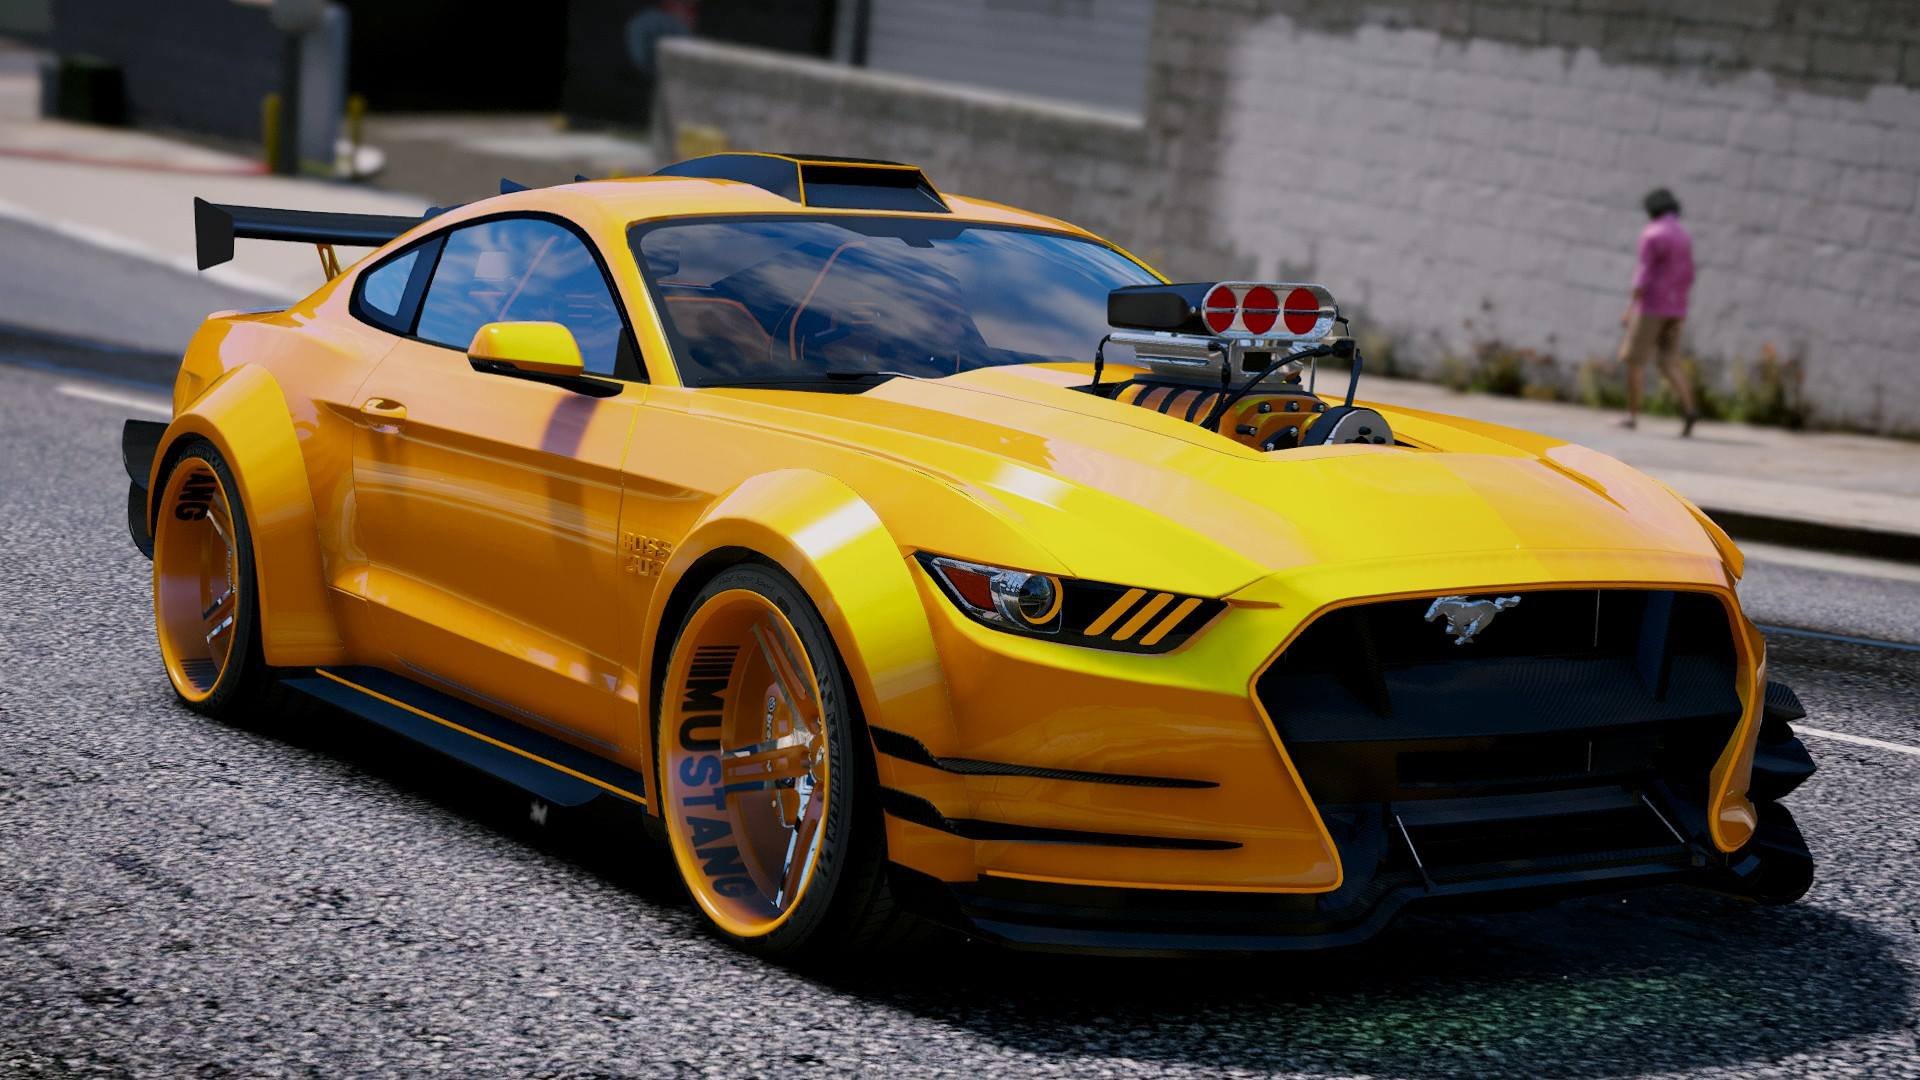 https://img.gta5-mods.com/q95/images/ford-mustang-gt-add-on-tuning/bf200d-16992112_748316778652641_9093040161686178858_o.jpg